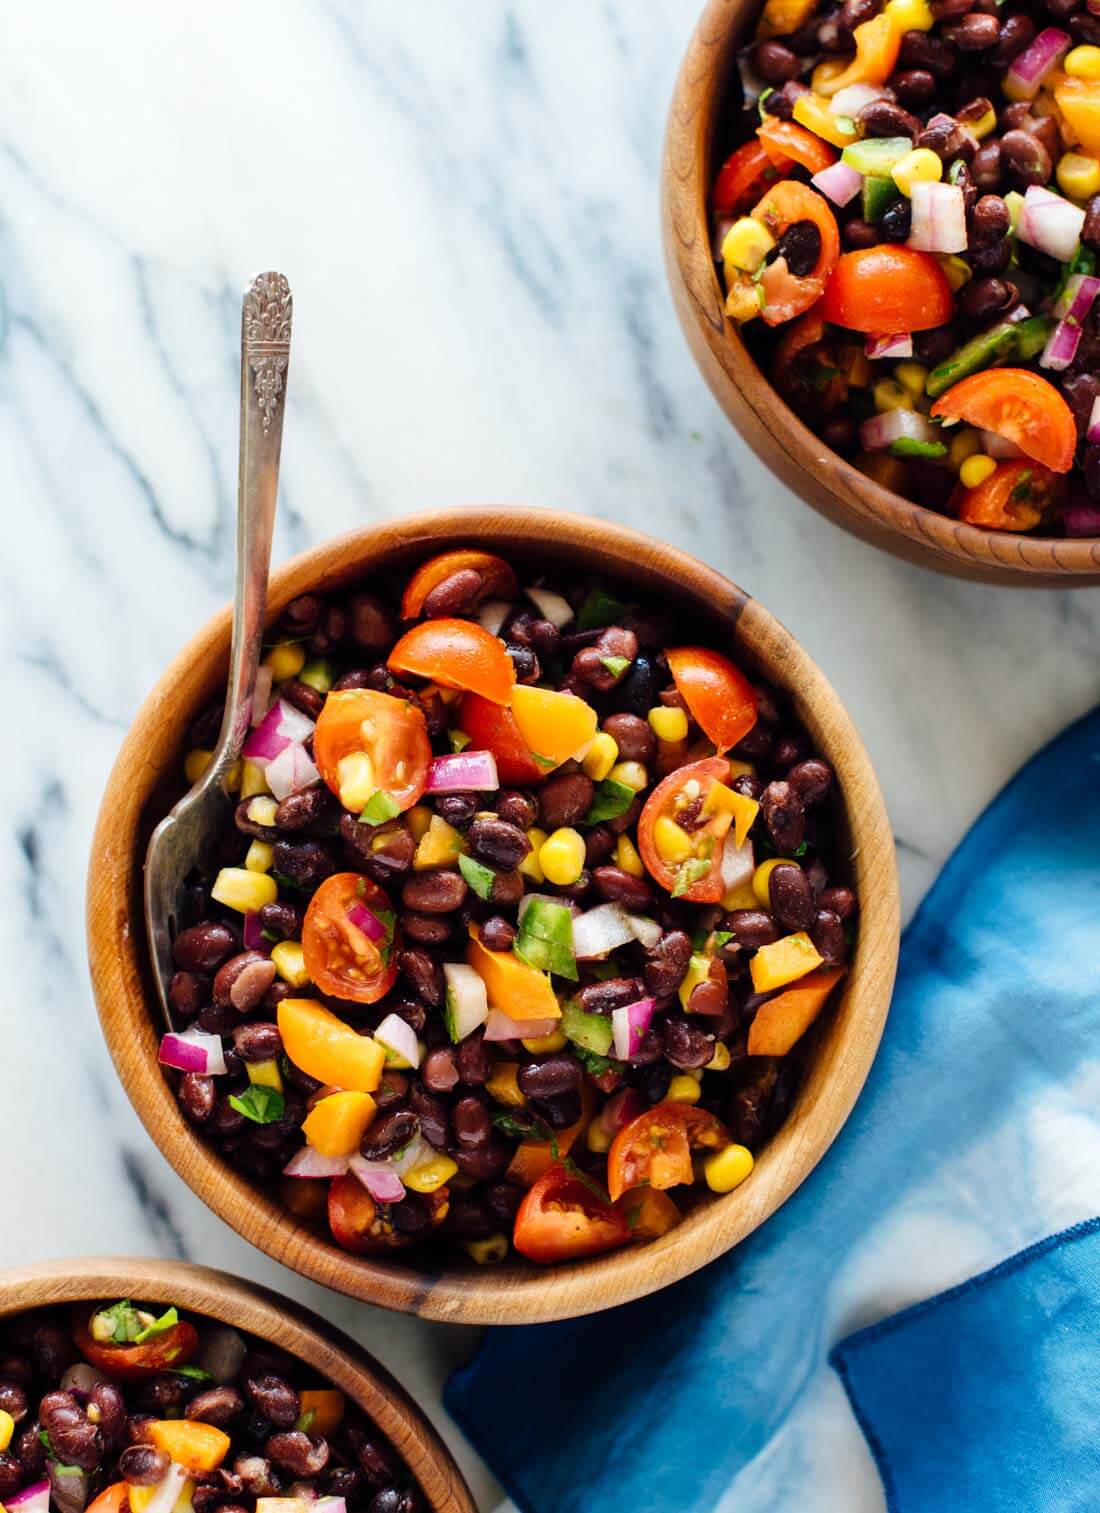 This fresh black bean salad recipe packs great for lunch! It's also perfect for parties and potlucks. Get the recipe at cookieandkate.com